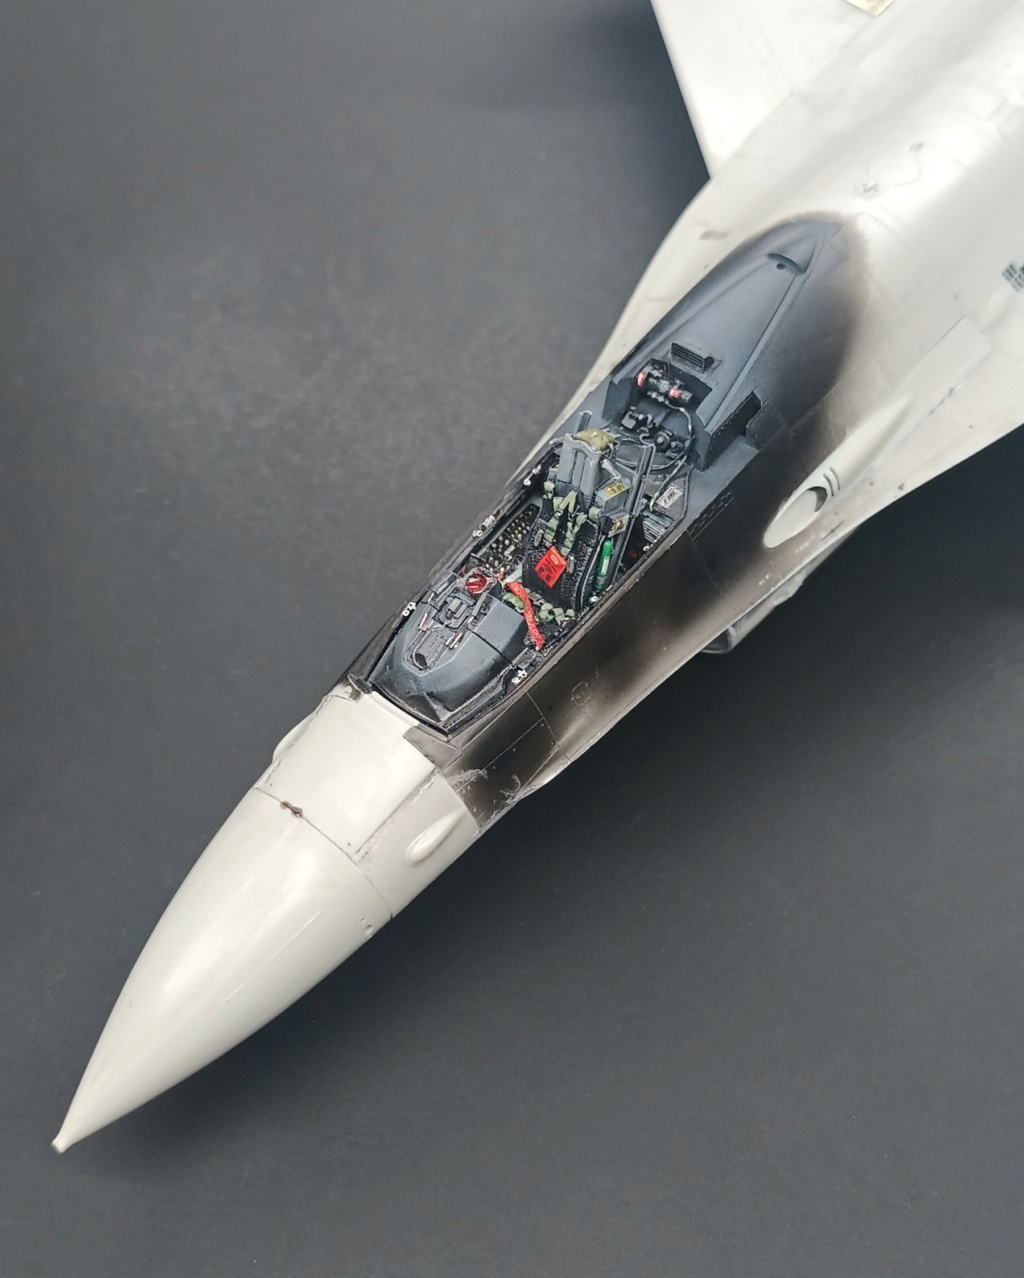 [Kinetic] 1/48  - McDonnell F/A-18A+ Hornet- VFC 12   / Double  [Tamiya] General Dynamics F-16C Fighting Falcon - 64th AGRS  1/48  - Aggressor - Page 3 20240210